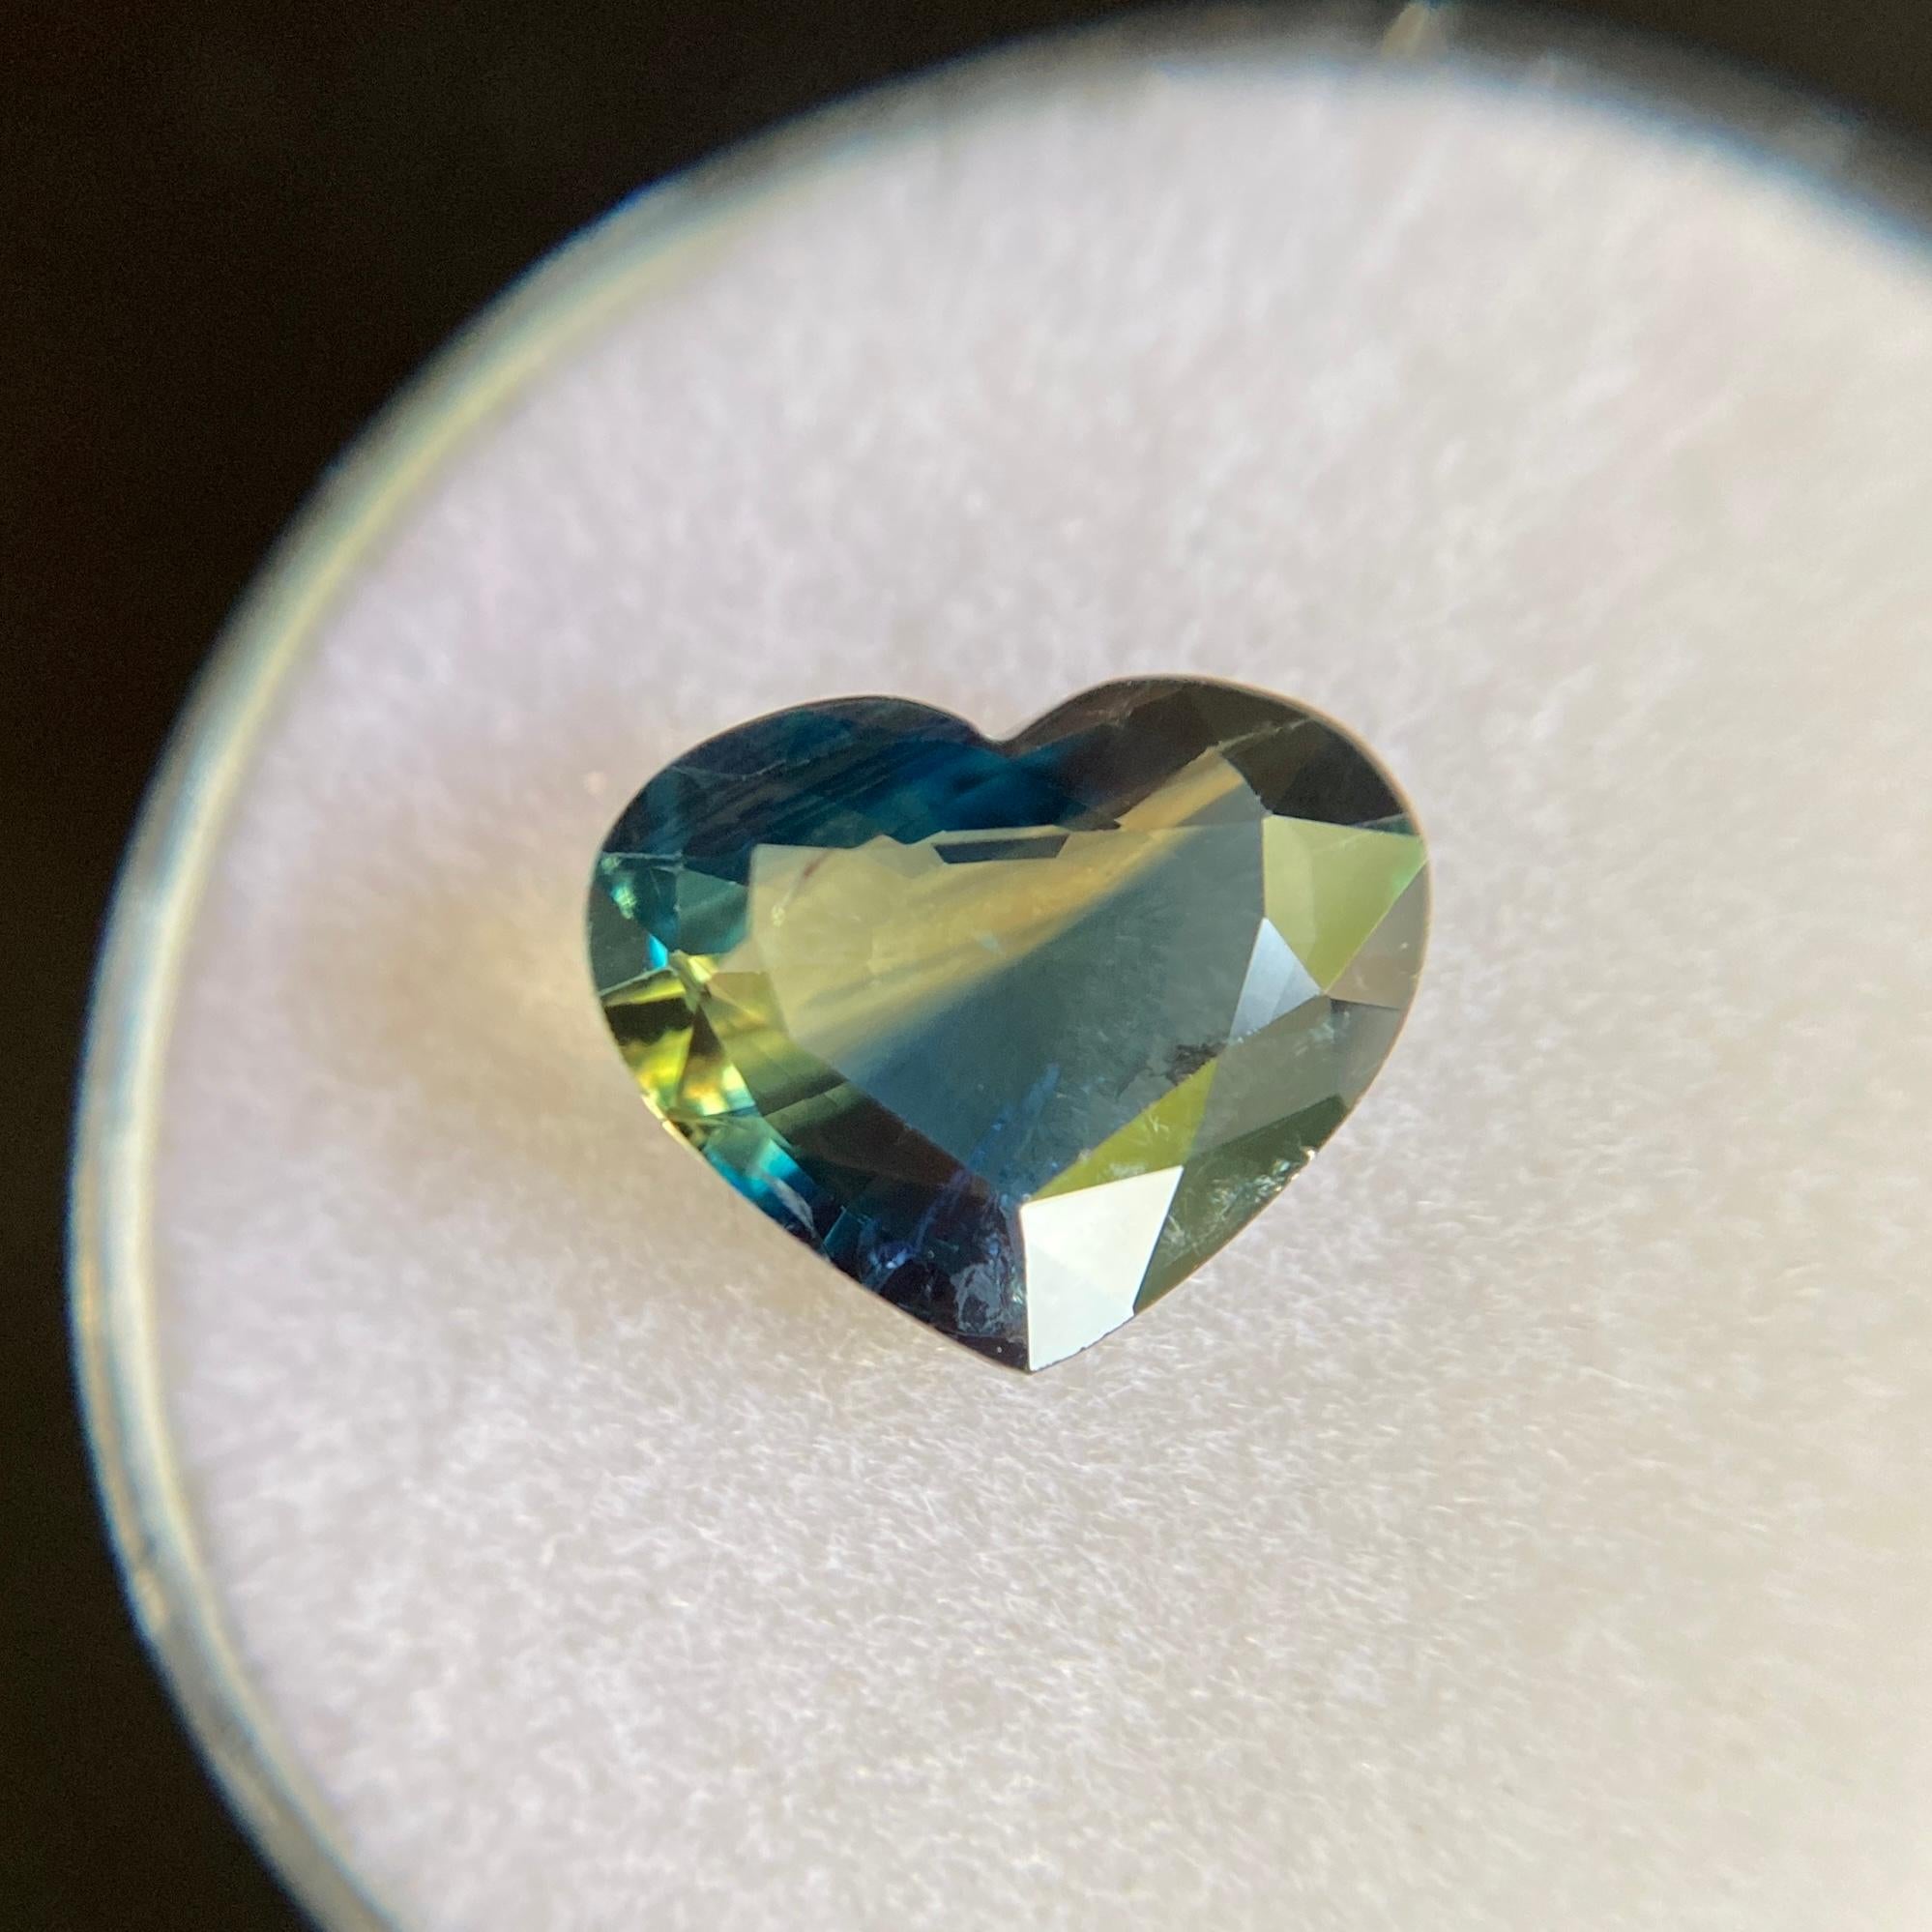 Unique Untreated Thai Parti Colour Sapphire Gemstone.

2.41 Carat unheated sapphire with a rare parti colour effect. Showing blue and yellow colours with a unique colour split. Very rare and stunning to see.

Fully certified by GIA confirming stone